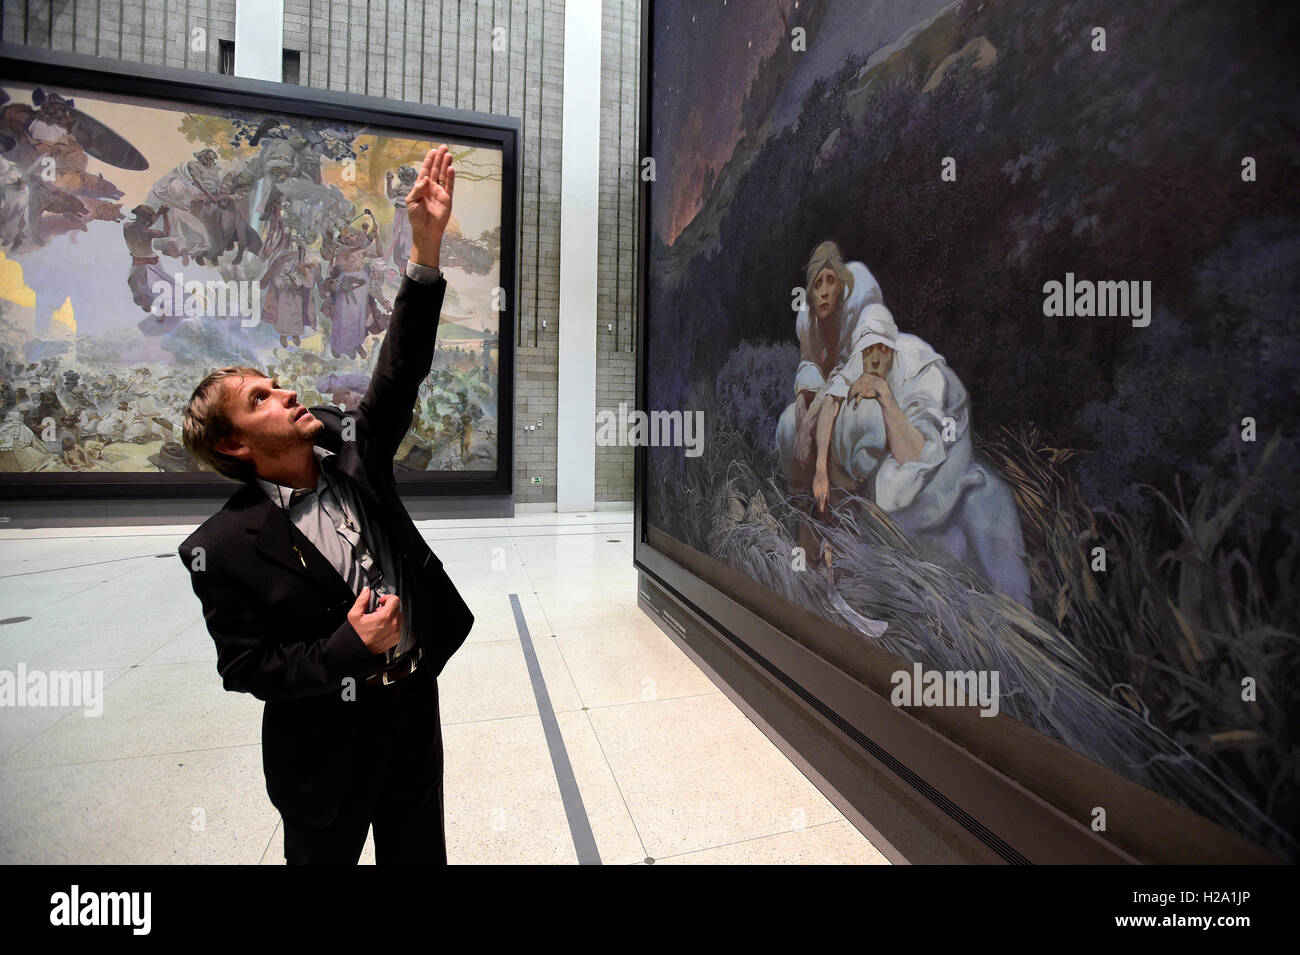 Prague, Czech Republic. 26th Sep, 2016. The Slav Epic cycle of paintings by Czech Art Nouveau artist Alfons Mucha (1860-1939) will fly to Tokyo in February where it will be displayed as of March 7, and then it will move to China as of mid-2017, Prague City Gallery director Magdalena Jurikova told reporters in Veletrzni (Trade Fair) Palace, Prague, Czech Republic, September 26, 2016. Restorer Tomas Berger points to the painting. © Roman Vondrous/CTK Photo/Alamy Live News Stock Photo